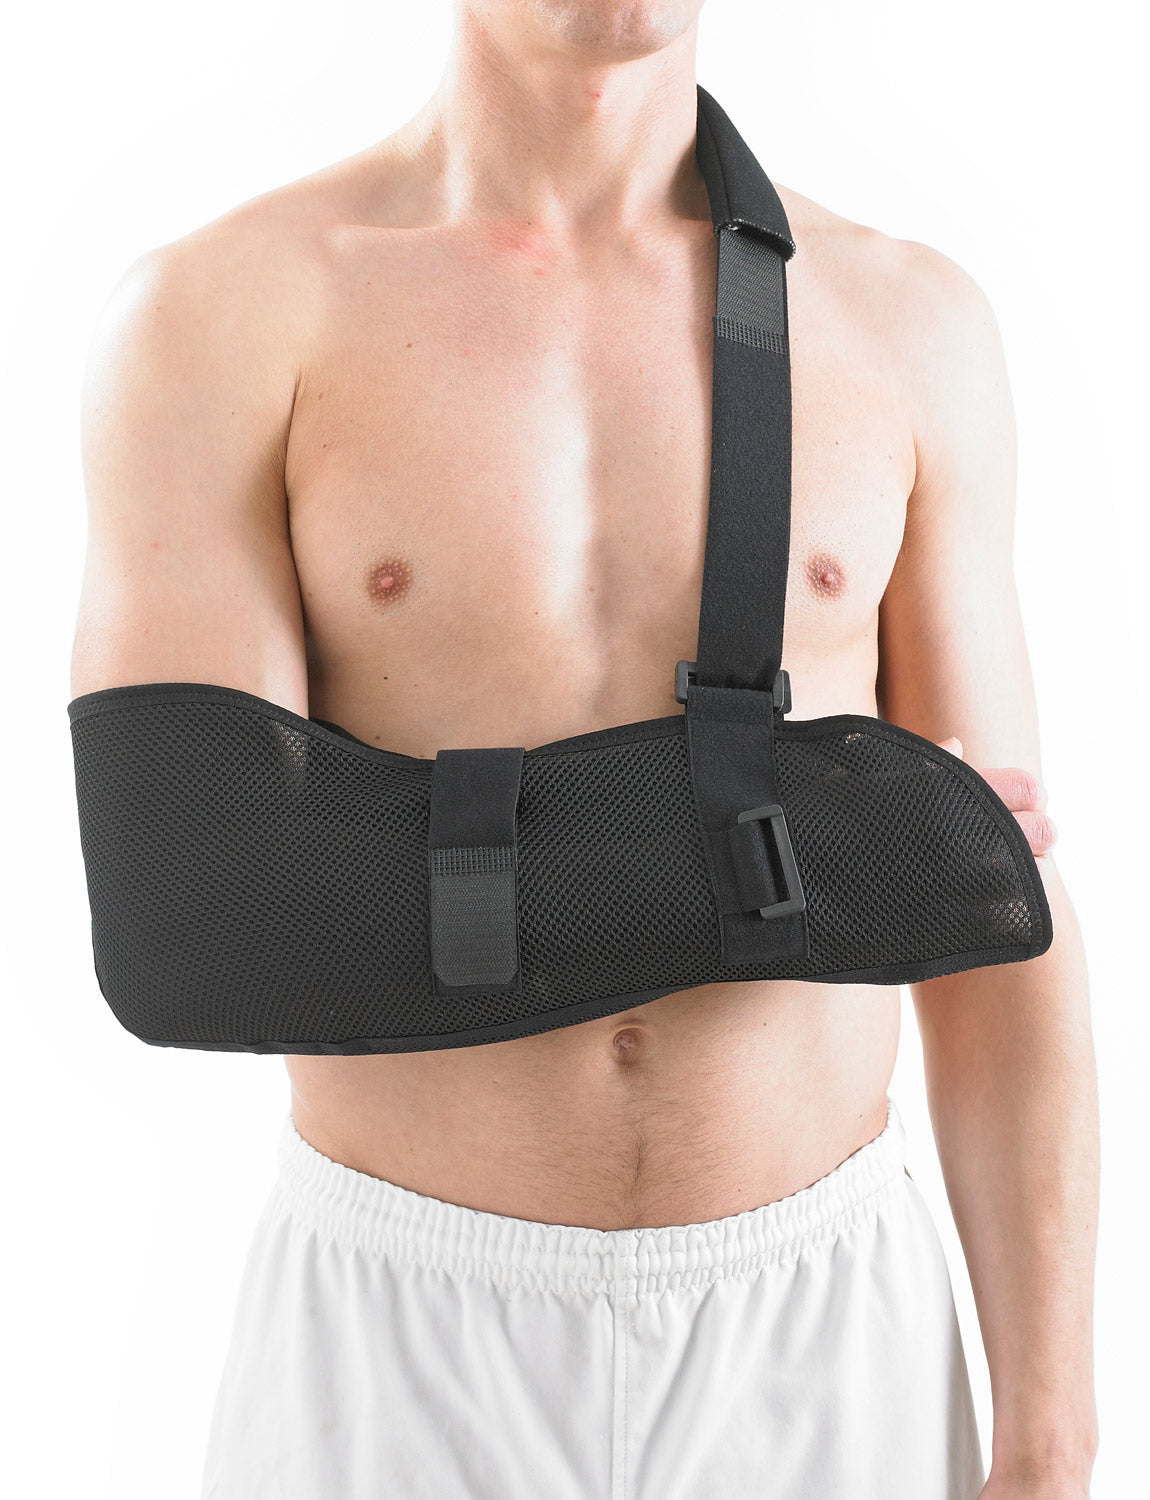 Neo G Arm Sling, Airflow Breathable, Universal Size